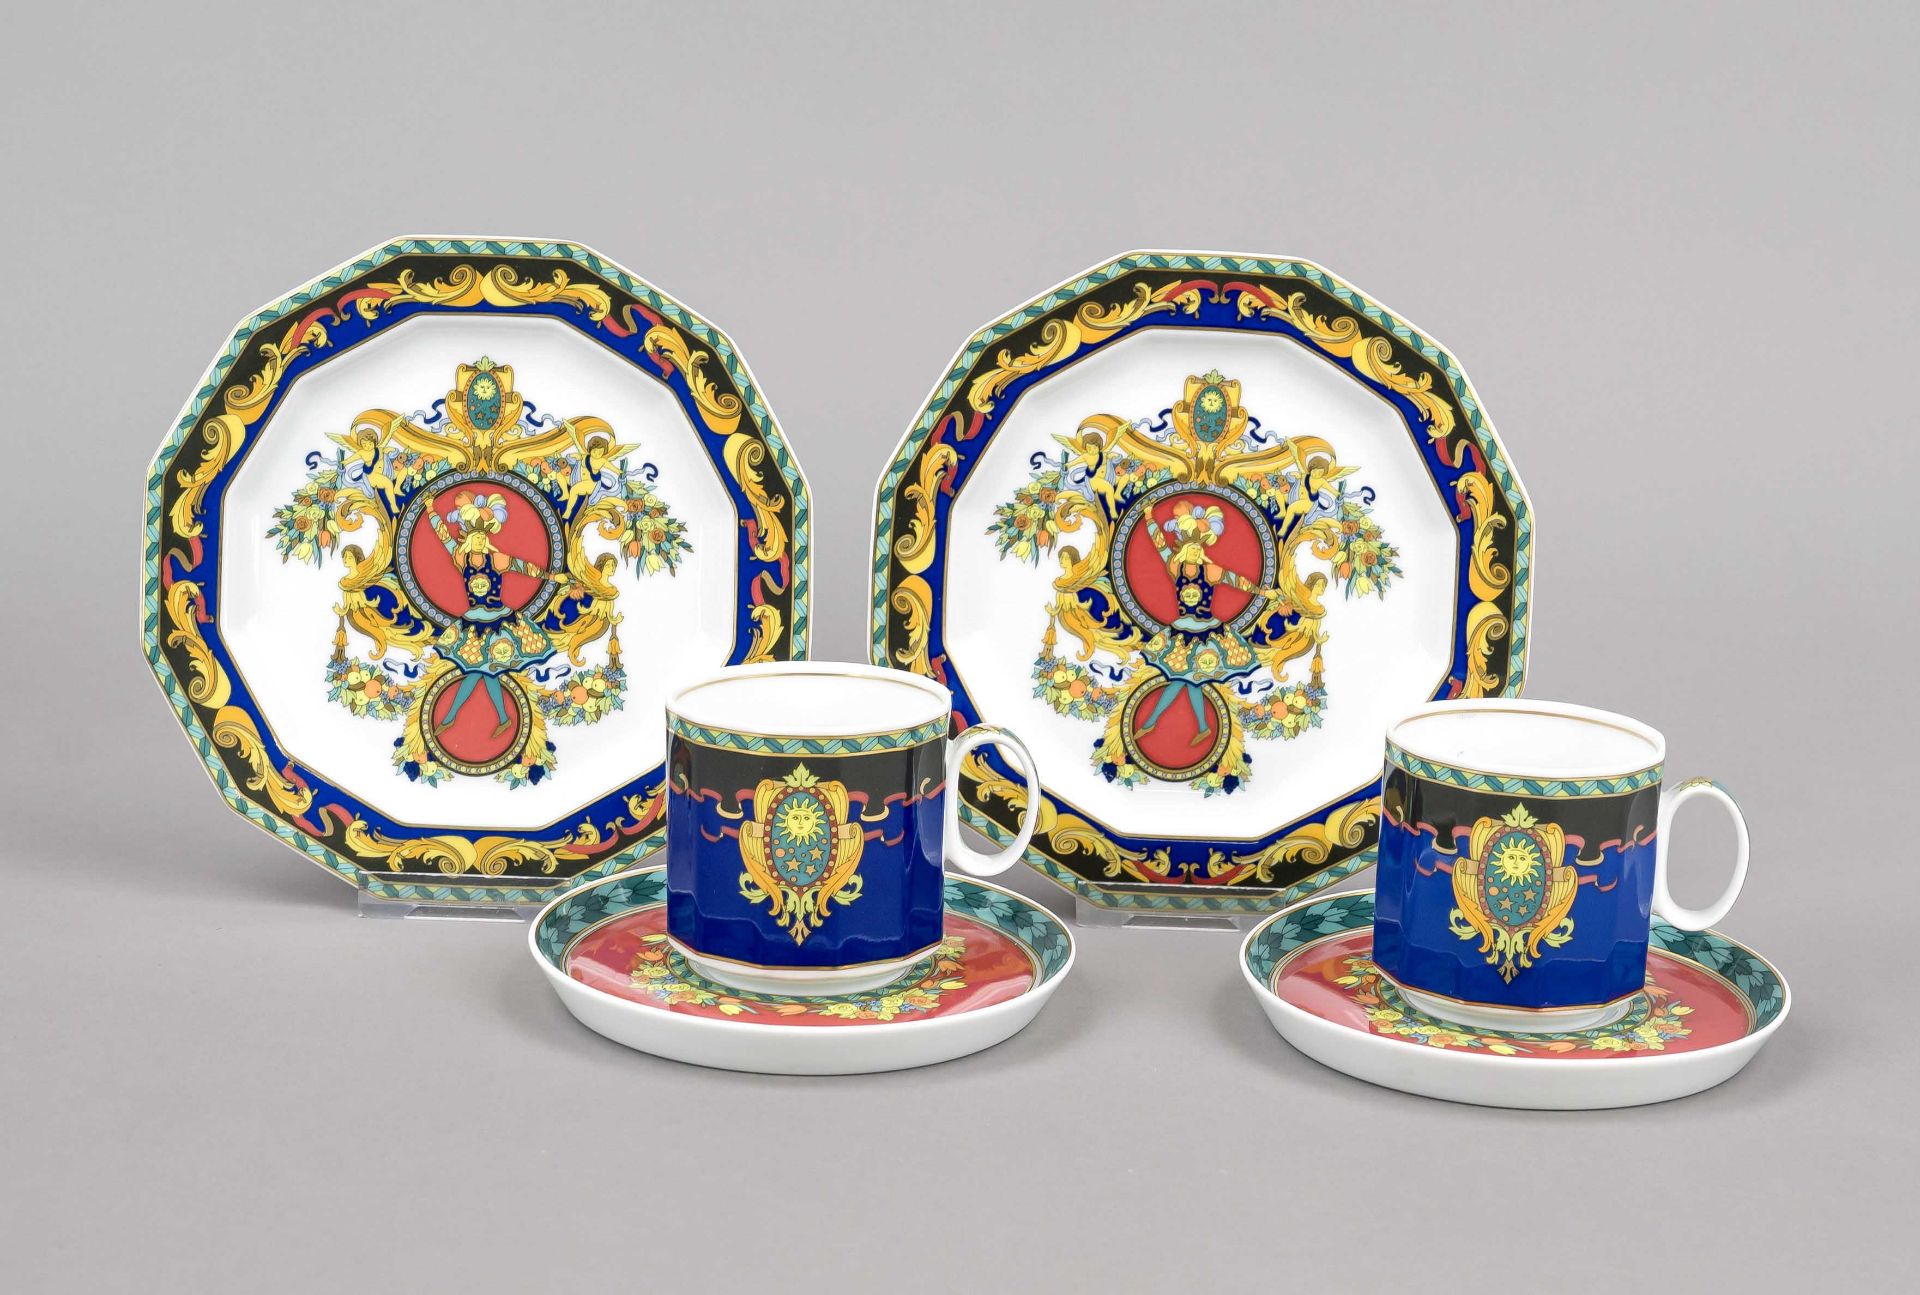 Two three-piece place settings, Rosenthal, Versace, late 20th century, Versace design for Rosenthal,